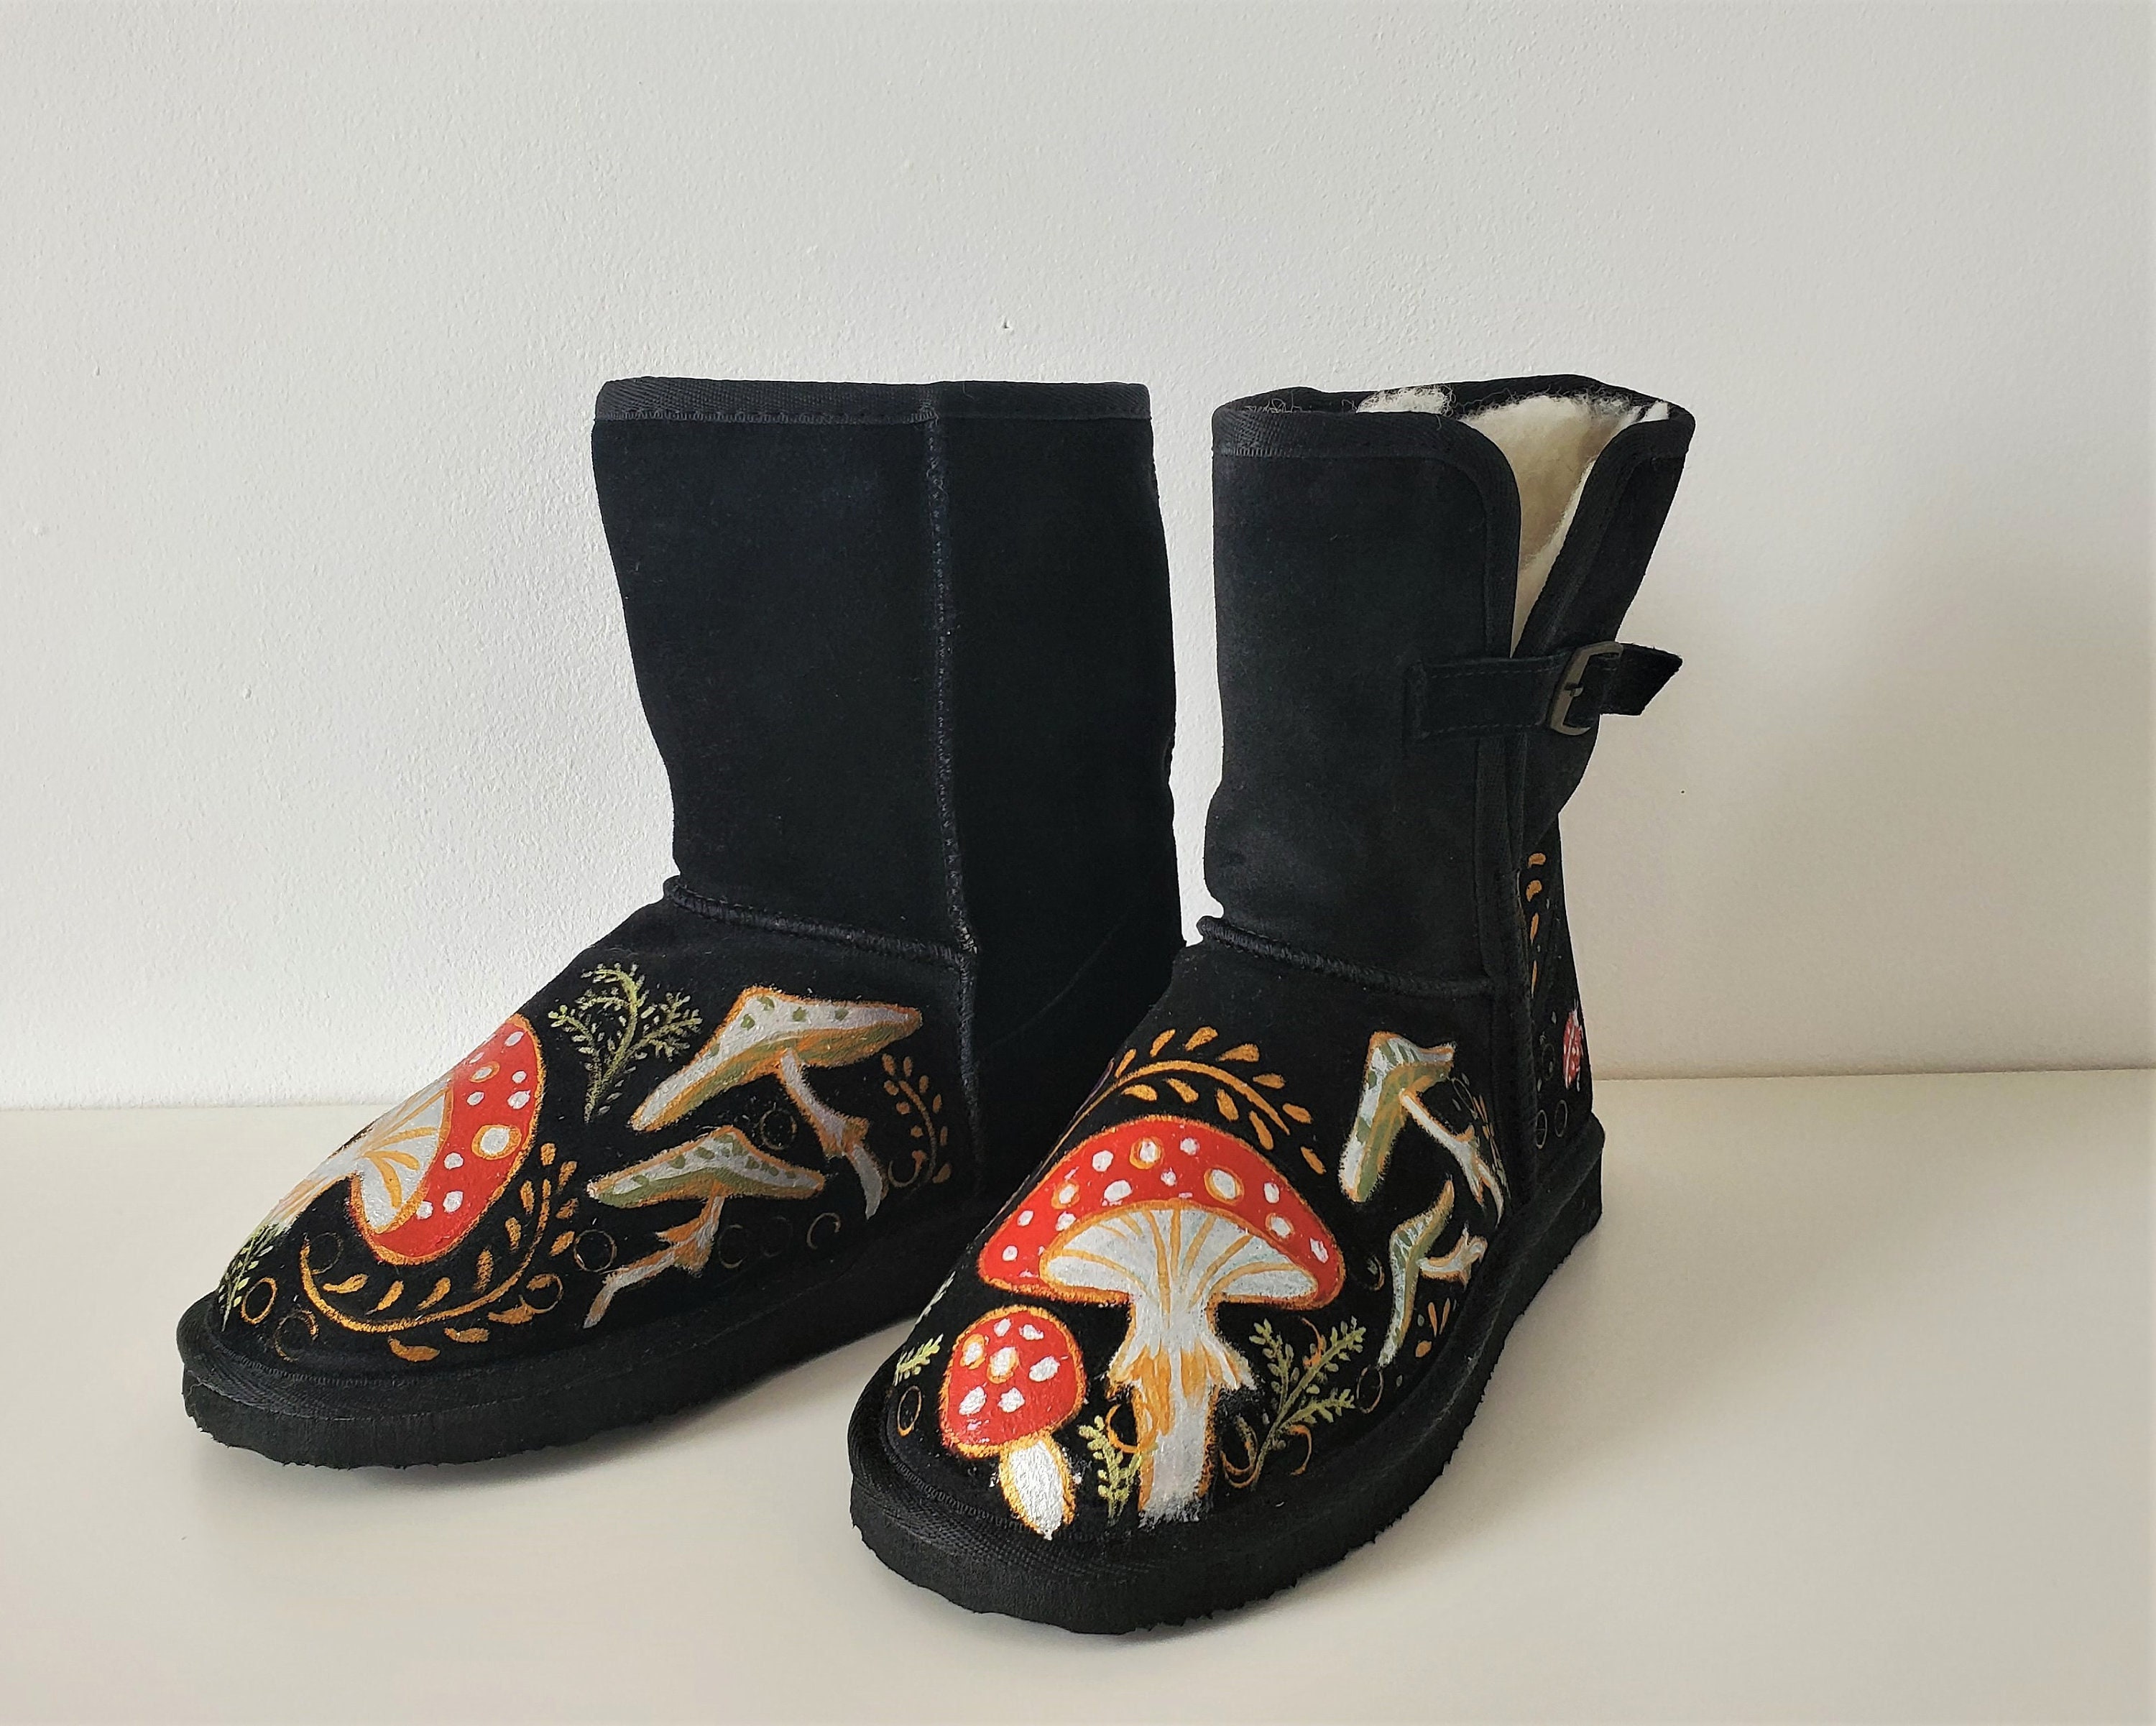 Custom Uggs Hand Painting on Your Boots Free Spirit -  Finland